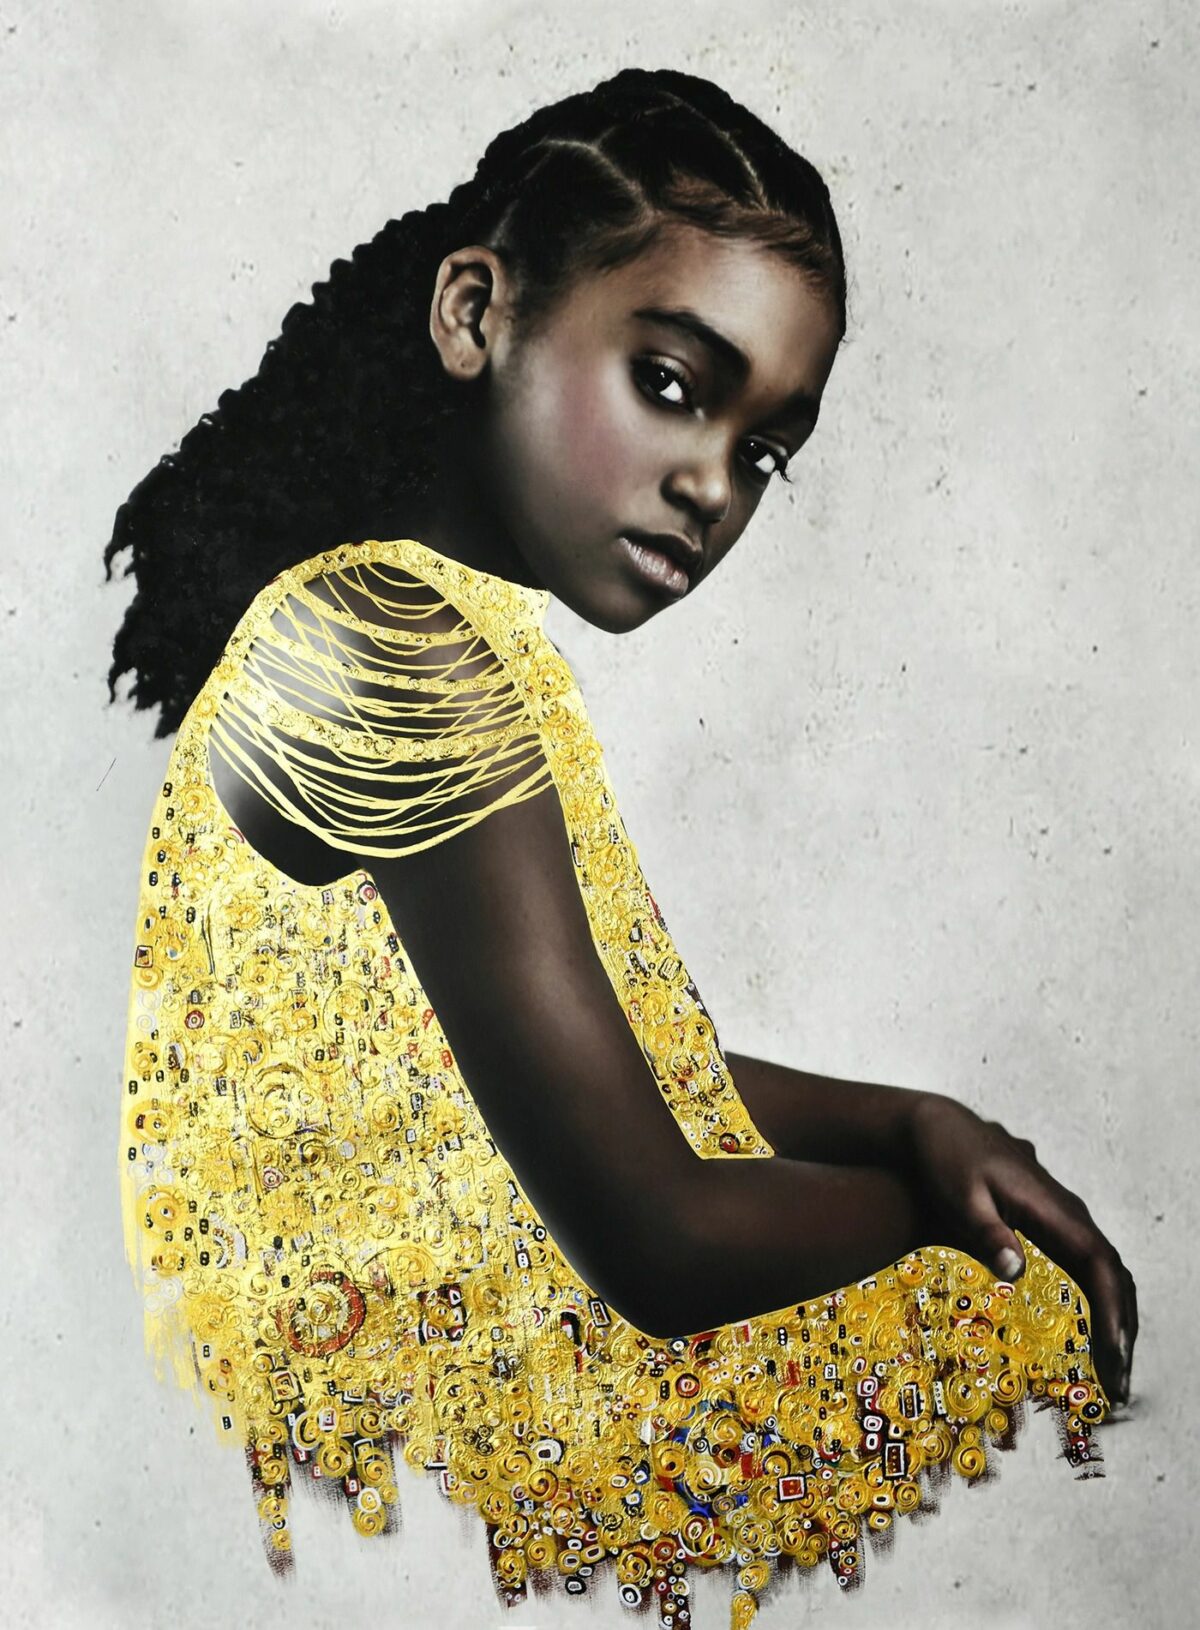 The Redemption Gorgeous Portraits Embellished With Gold Details By Tawny Chatmon 2